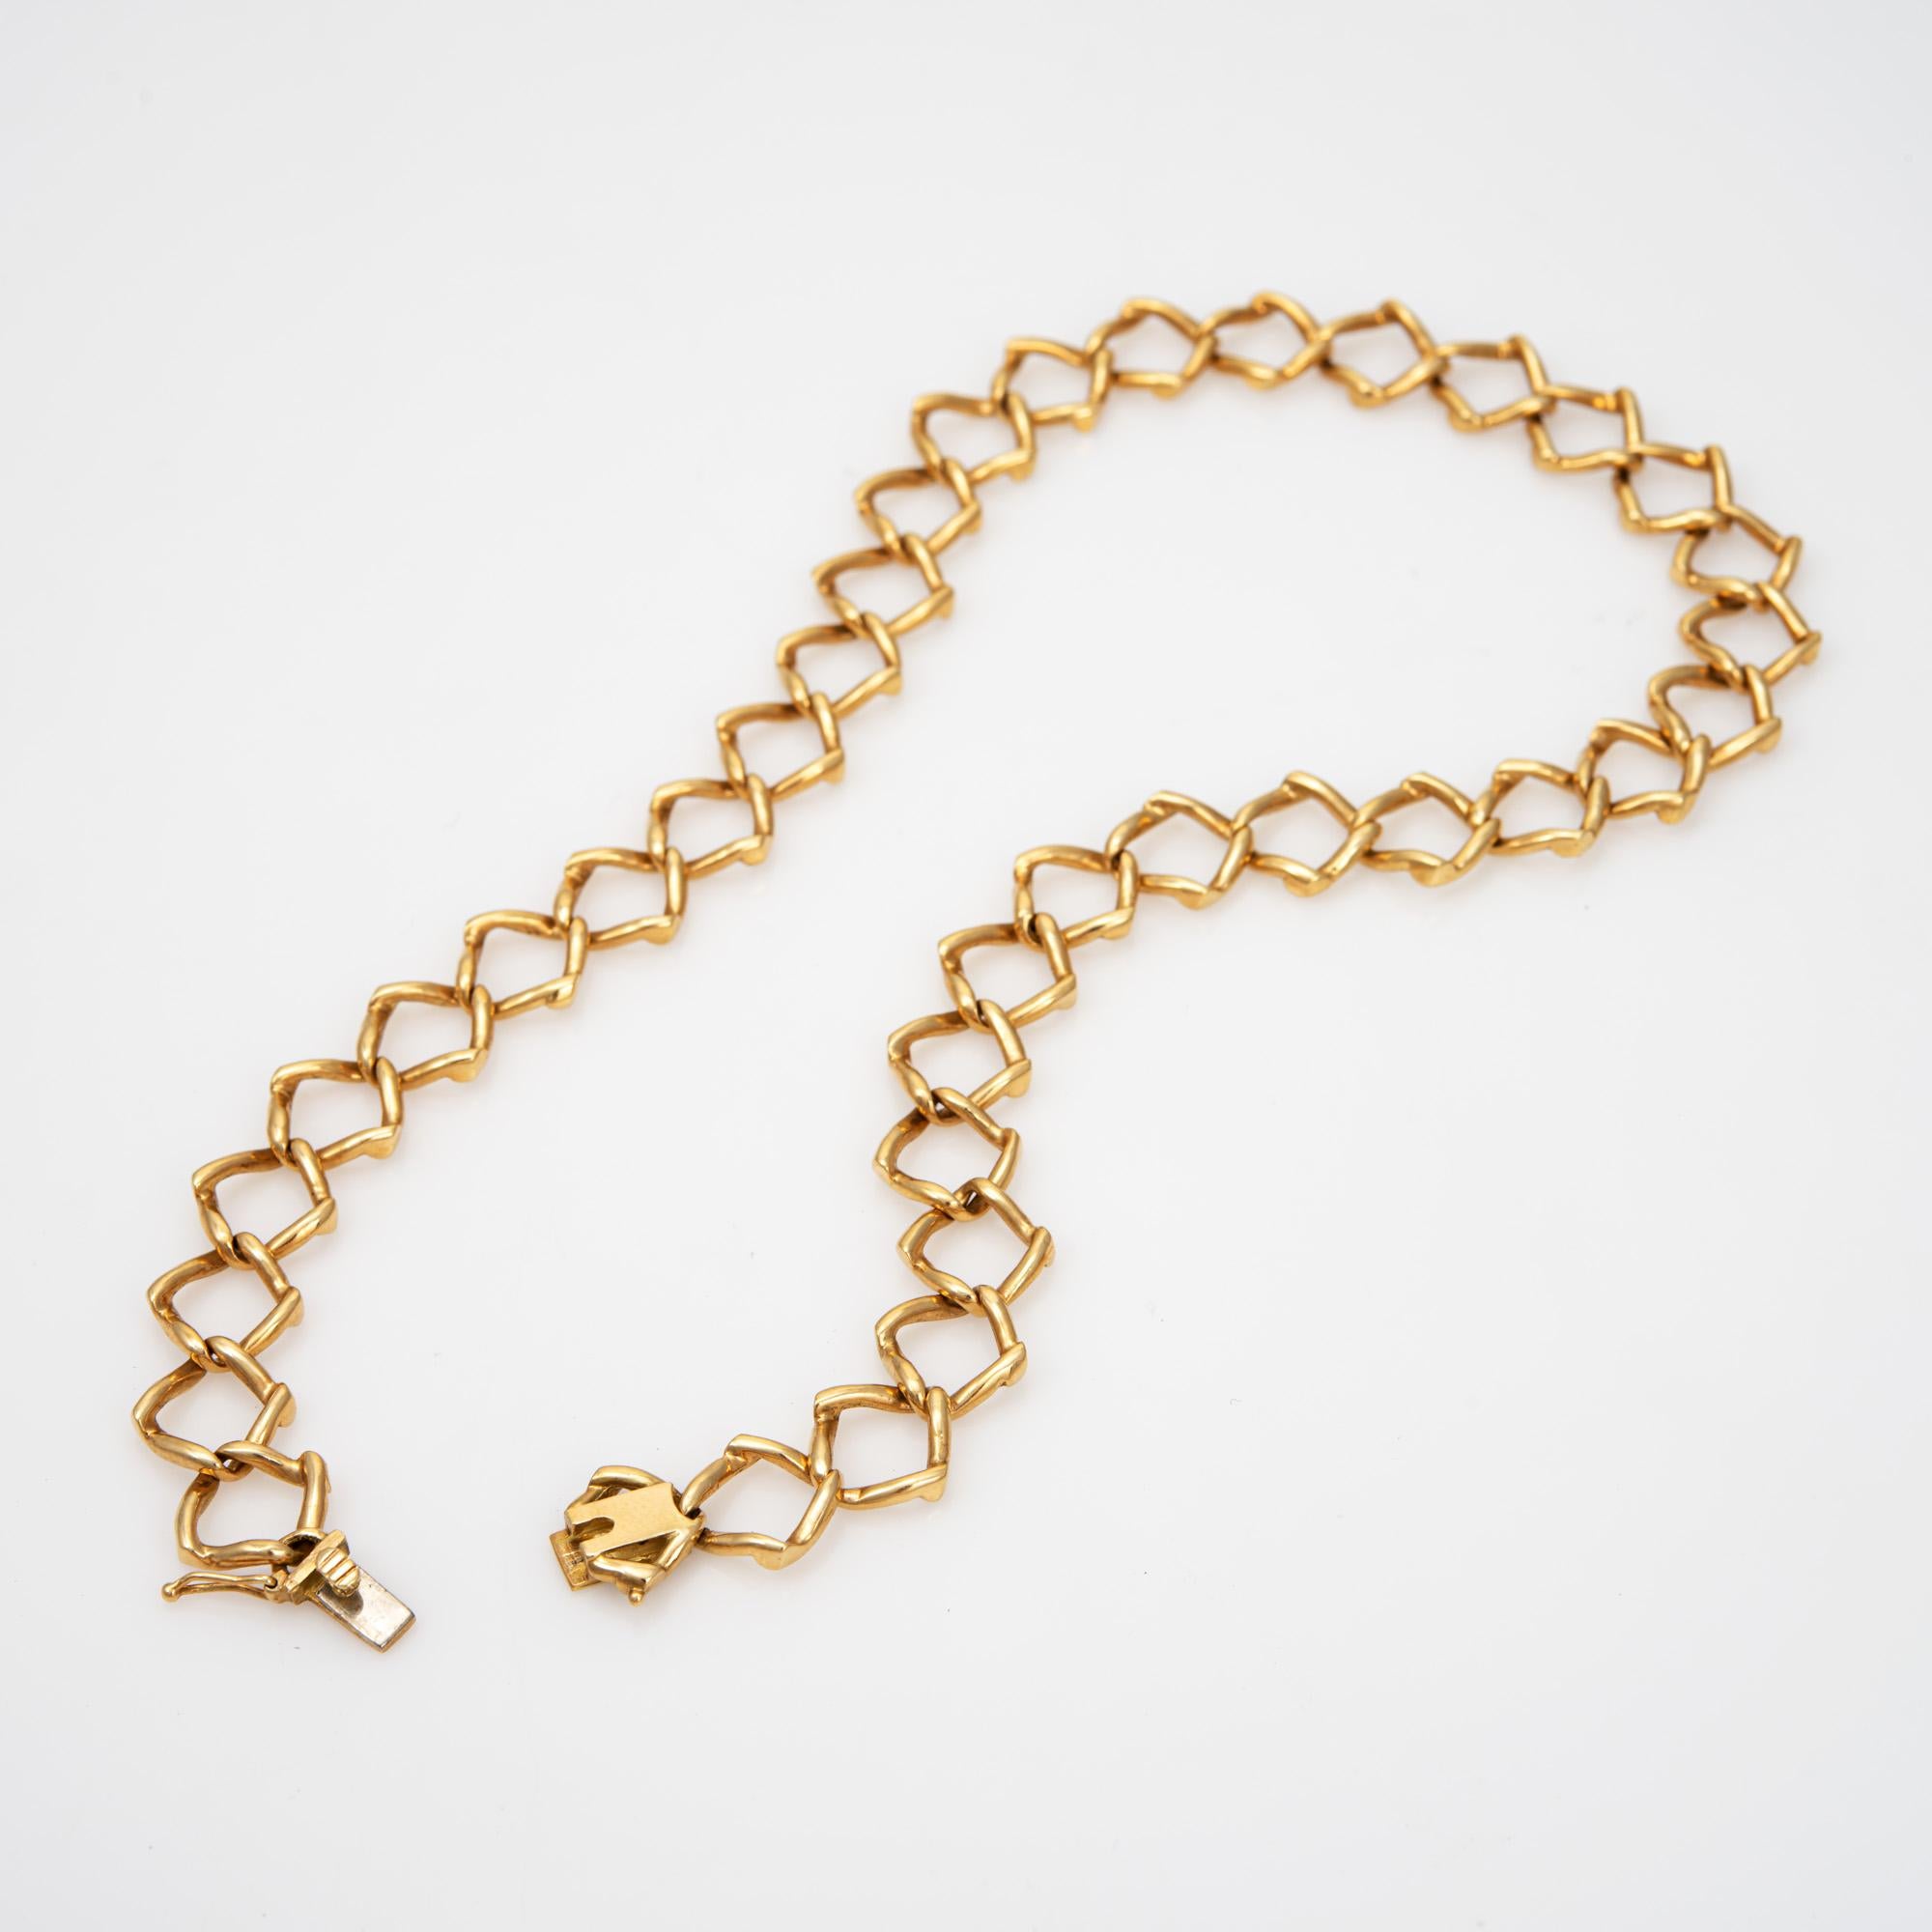 Rare vintage Tiffany & Co necklace designed by Paloma Picasso, crafted in 18 karat yellow gold (circa 1981).  

Dating to 1981 the bold open link necklace is designed by Paloma Picasso for Tiffany & Co, the year after she started her design work at